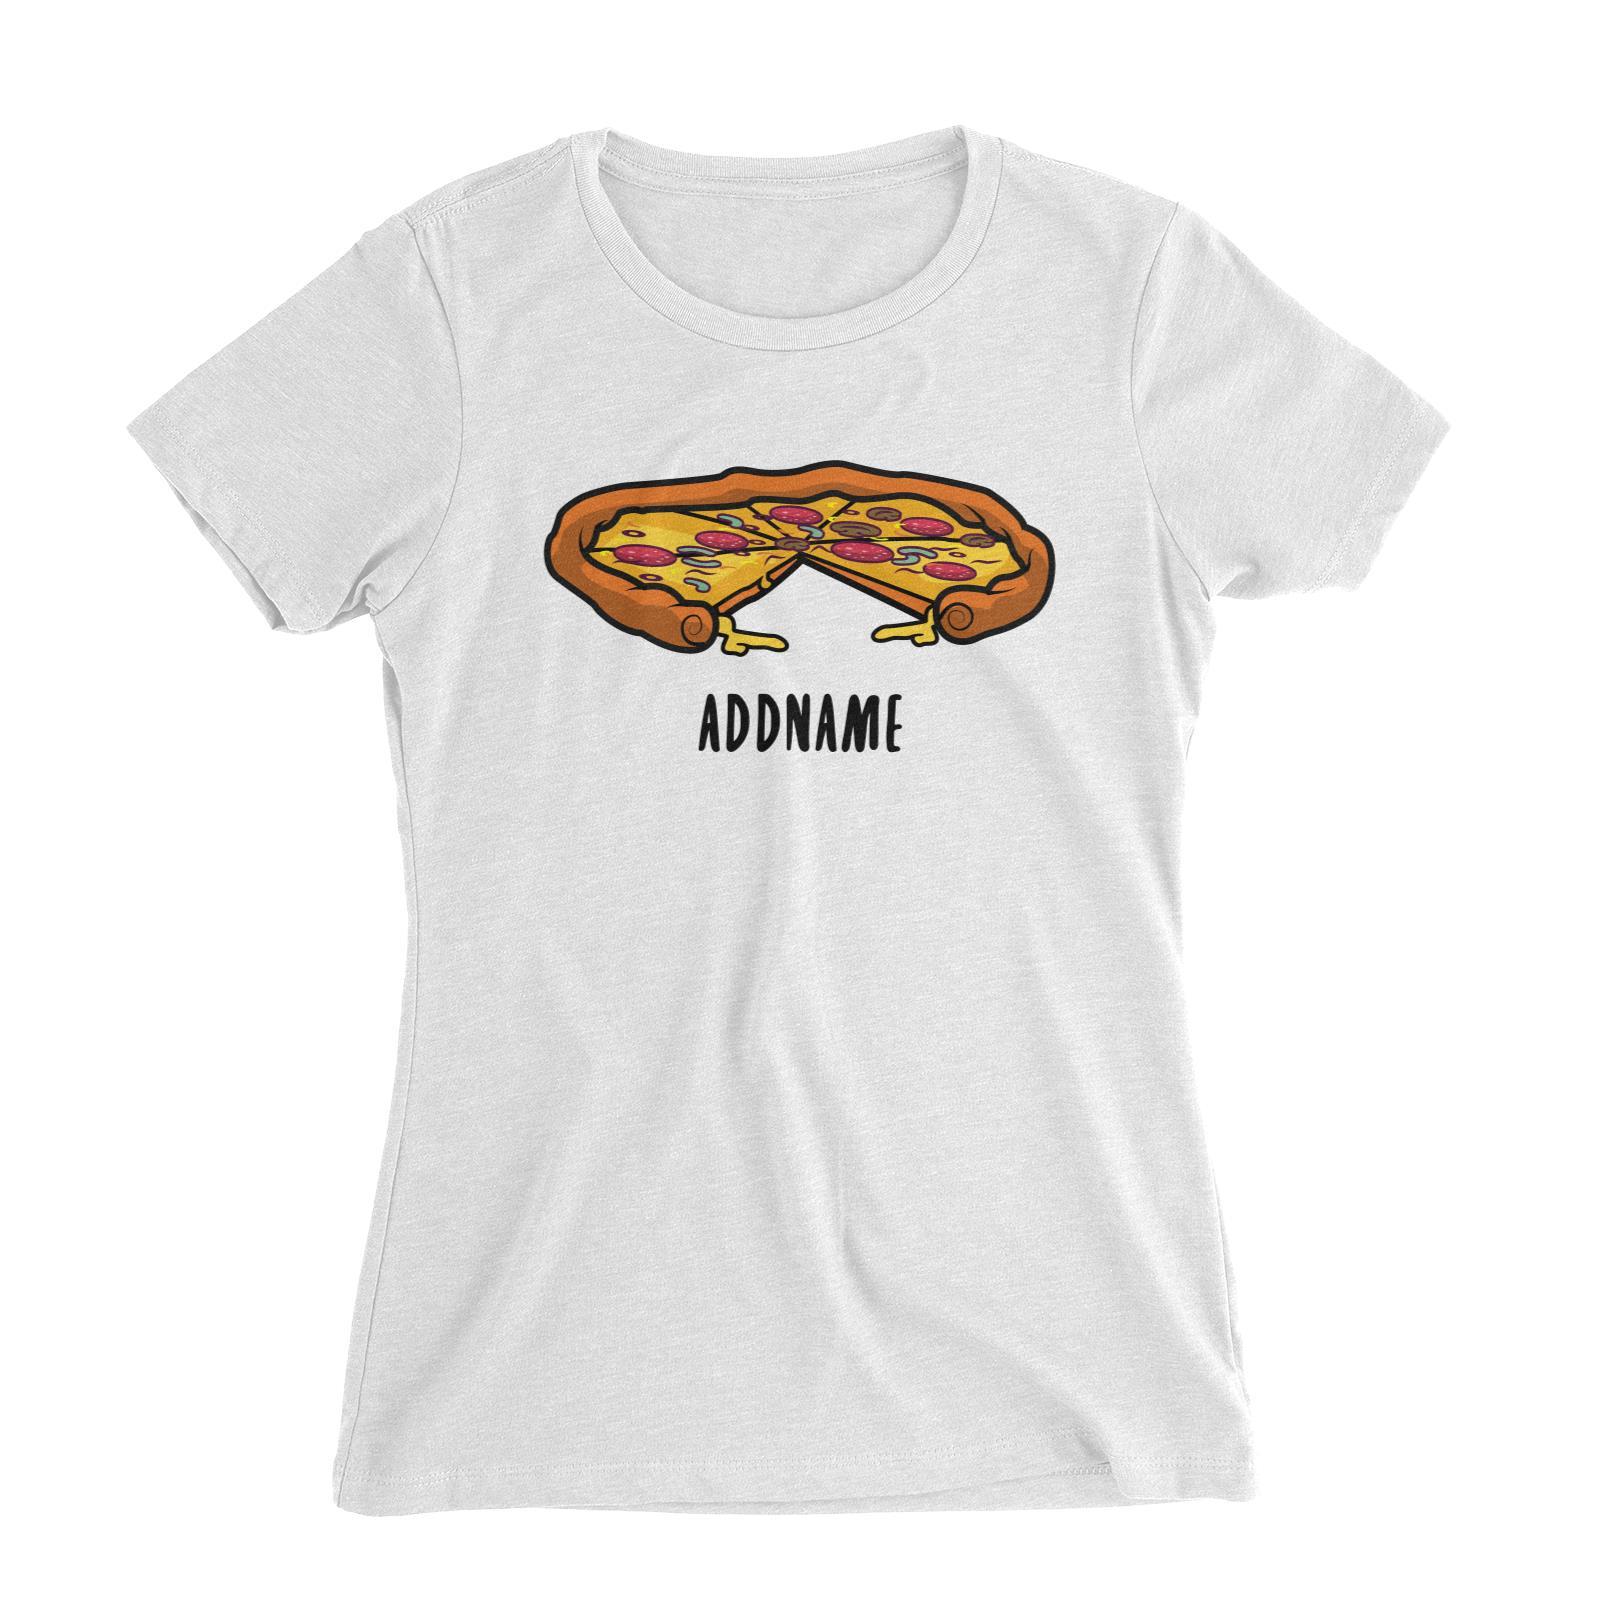 Fast Food Whole Pizza with A Slice Taken Out Addname Women's Slim Fit T-Shirt  Matching Family Comic Cartoon Personalizable Designs